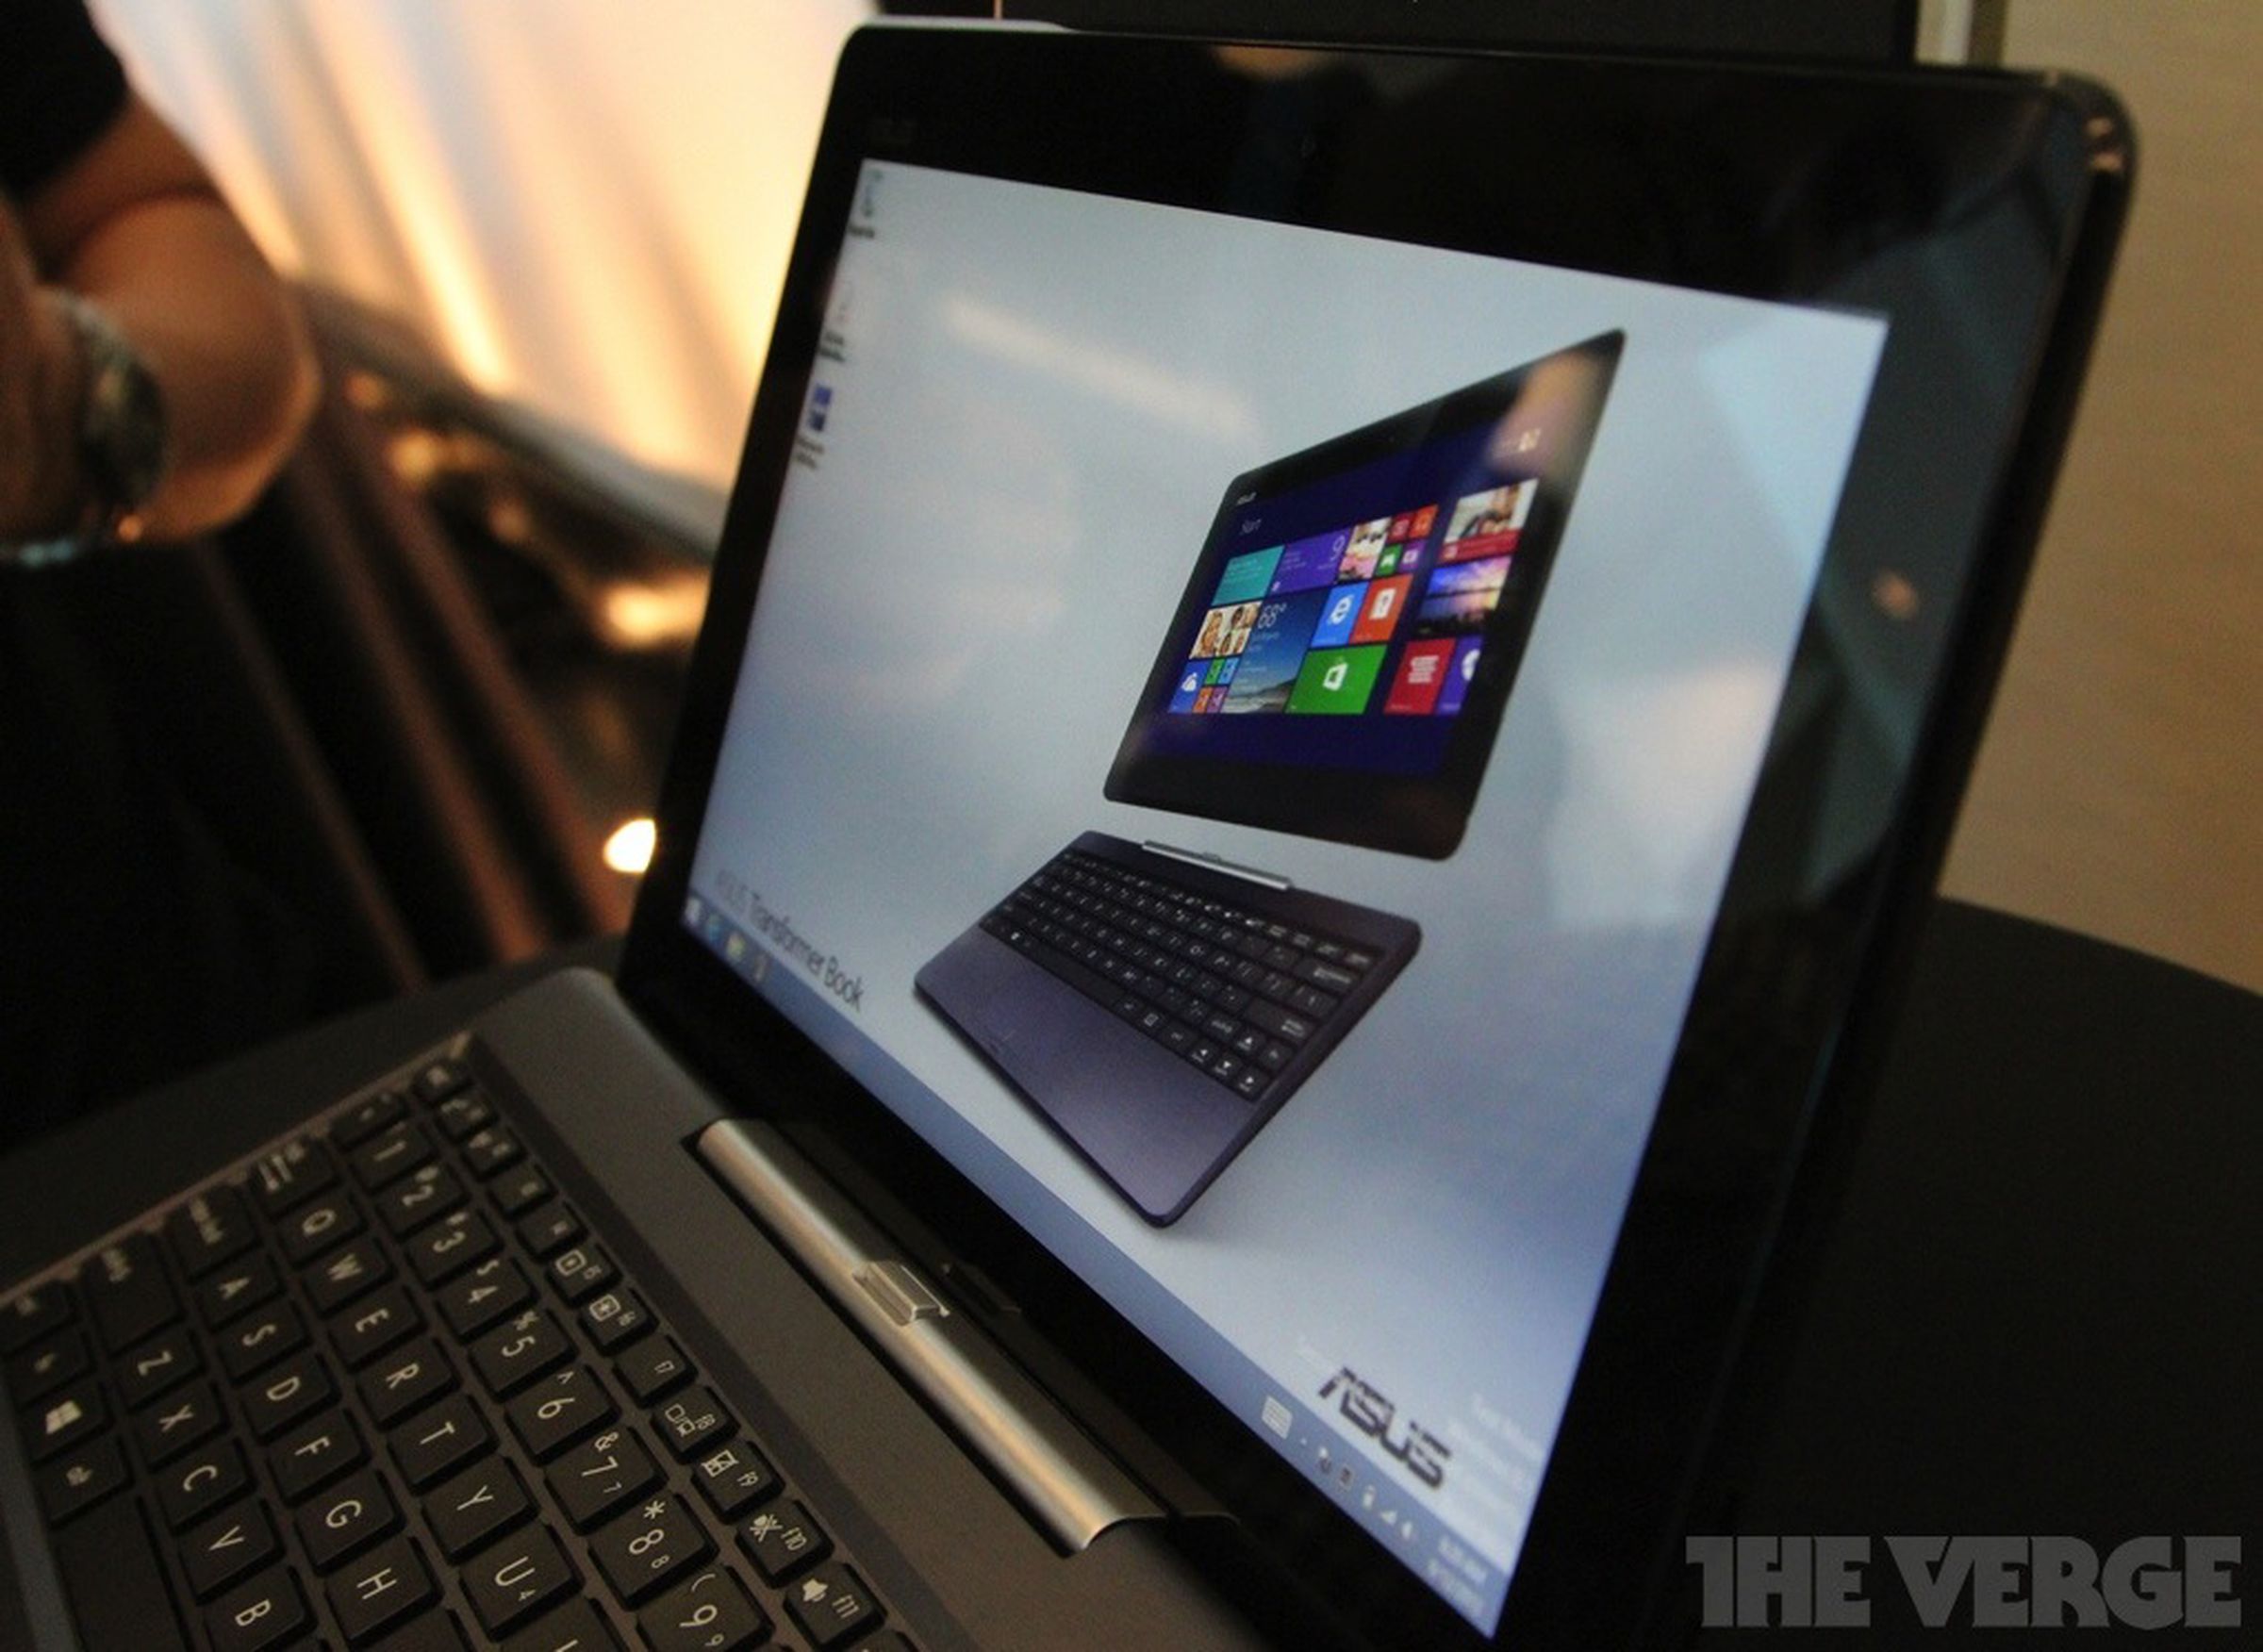 Asus Transformer Book T100 hands-on pictures